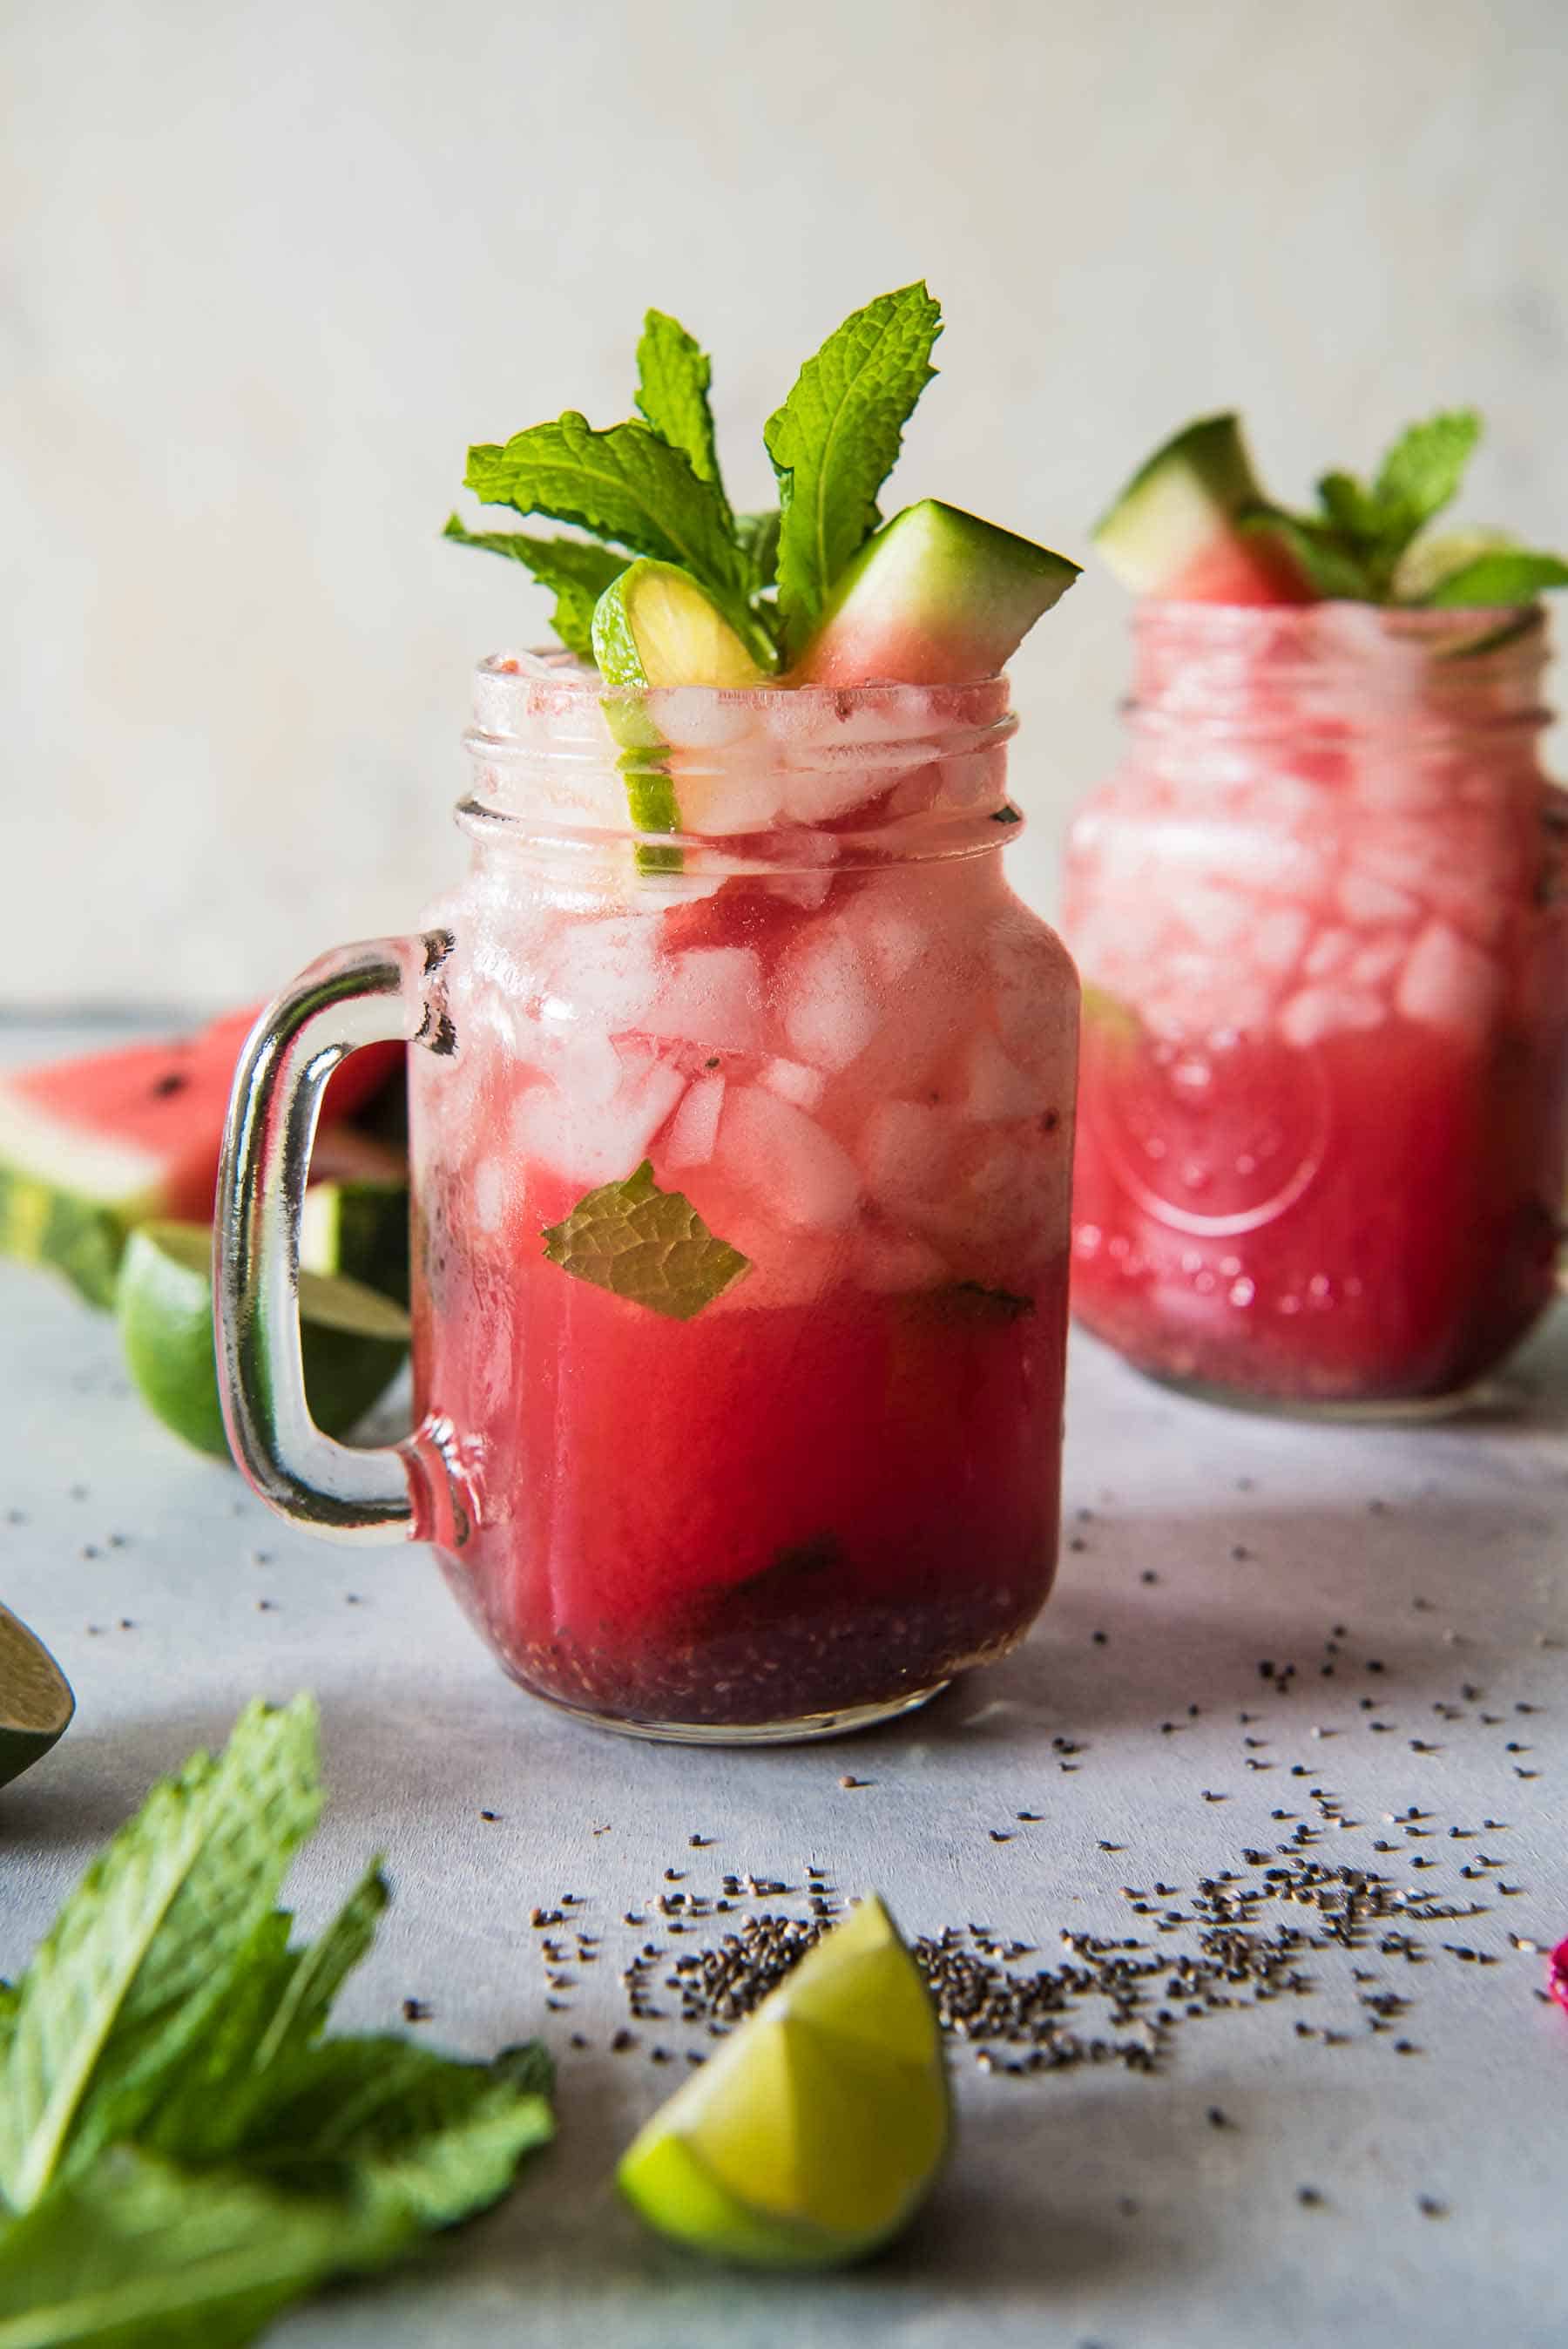 Fresh ingredients are the way to go to make the perfect summer cocktail - the Watermelon Mojito! This fruity twist on the classic Cuban mojito will make you feel like you're lounging beneath the palms no matter where you are!